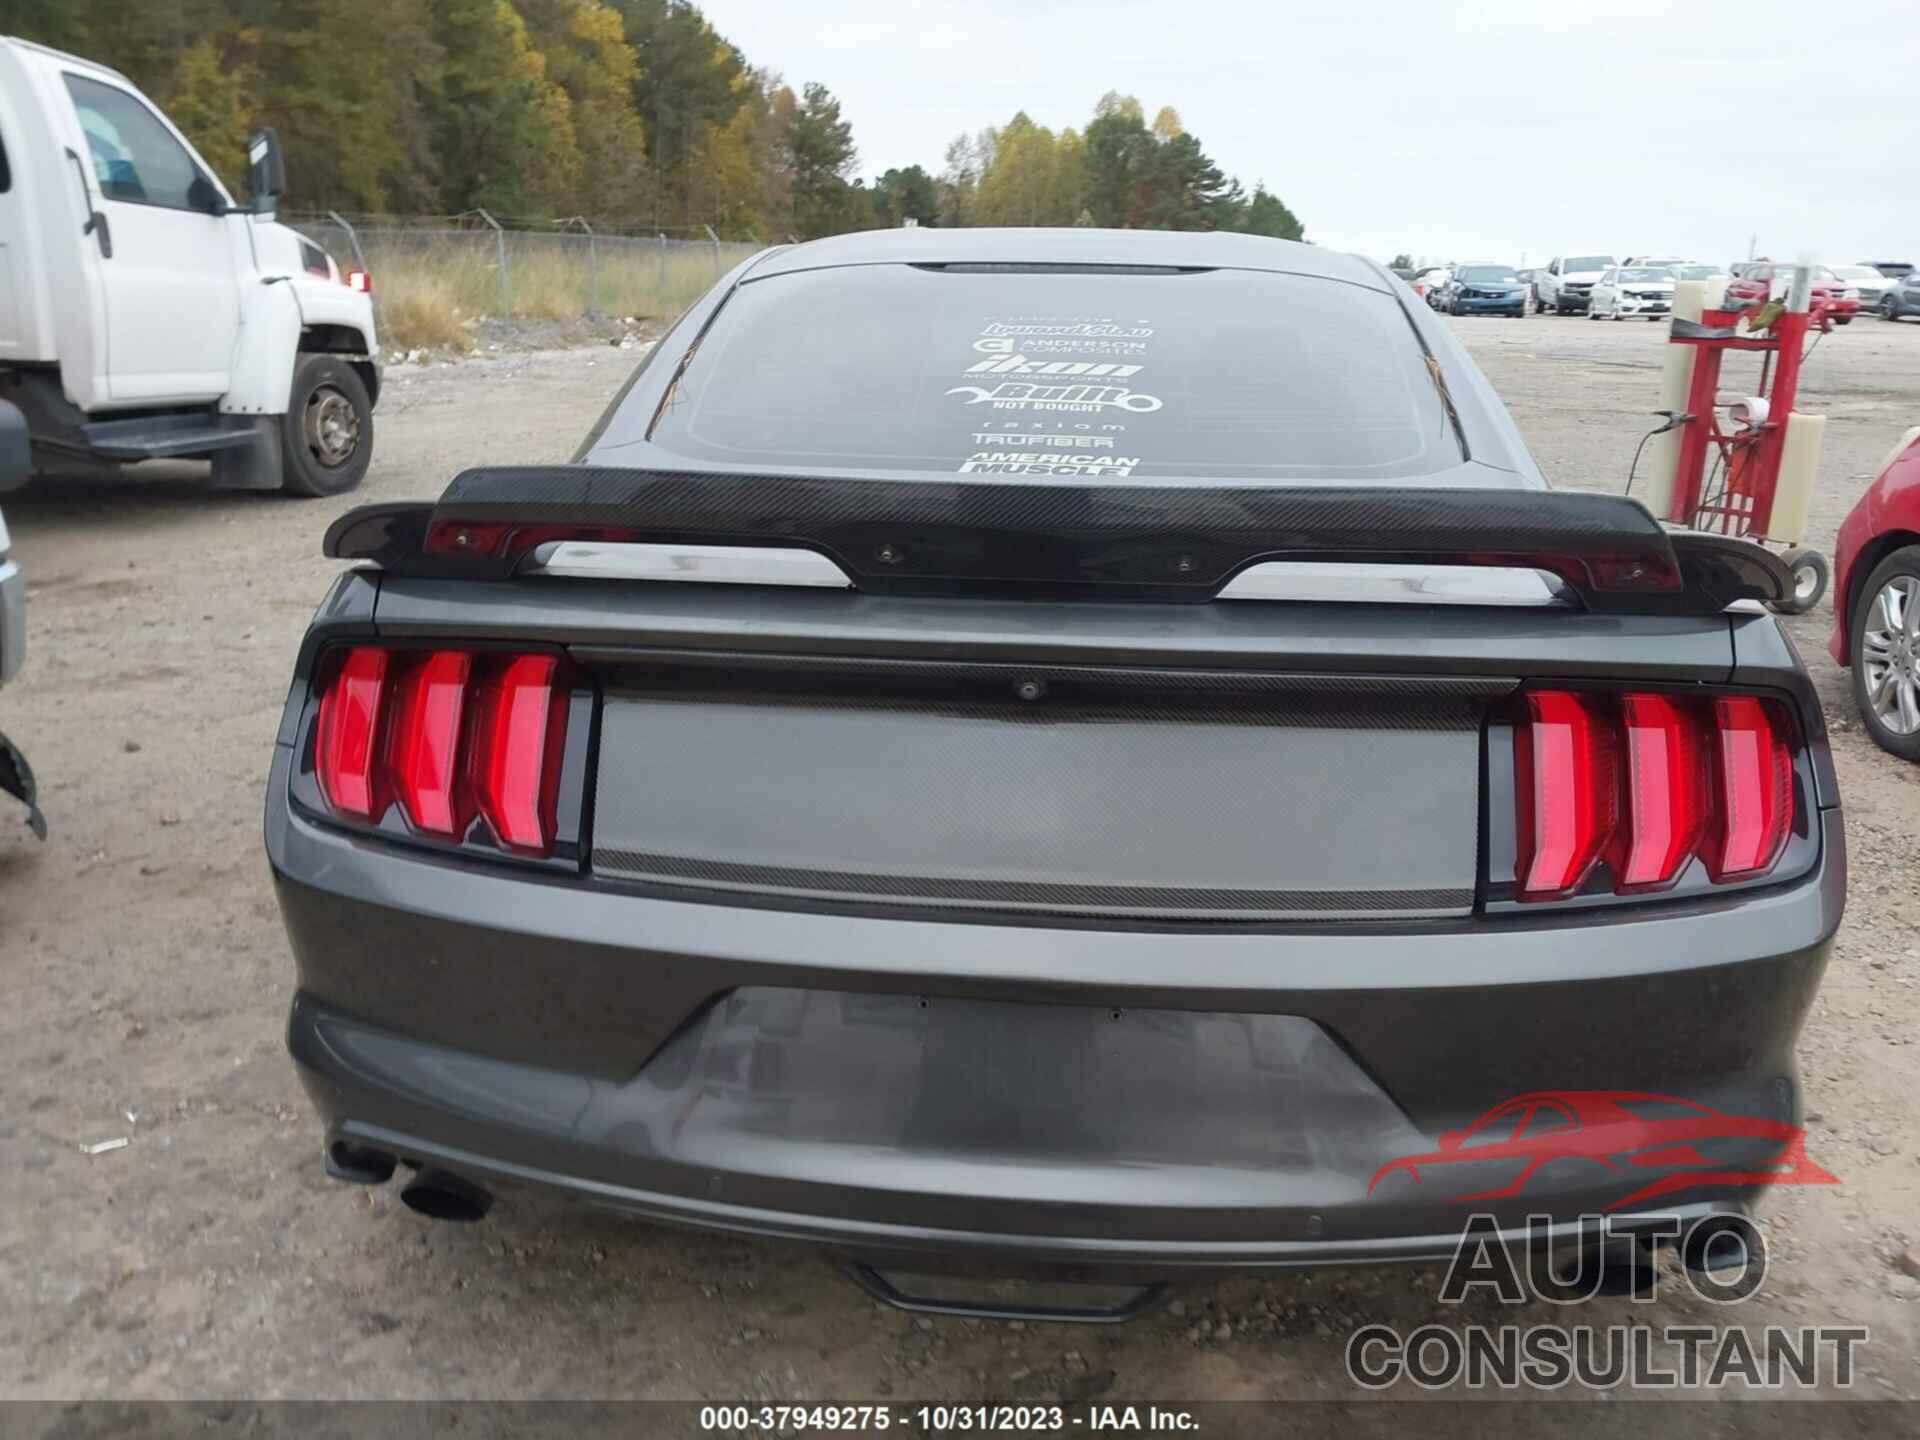 FORD MUSTANG 2017 - 1FA6P8TH4H5328807